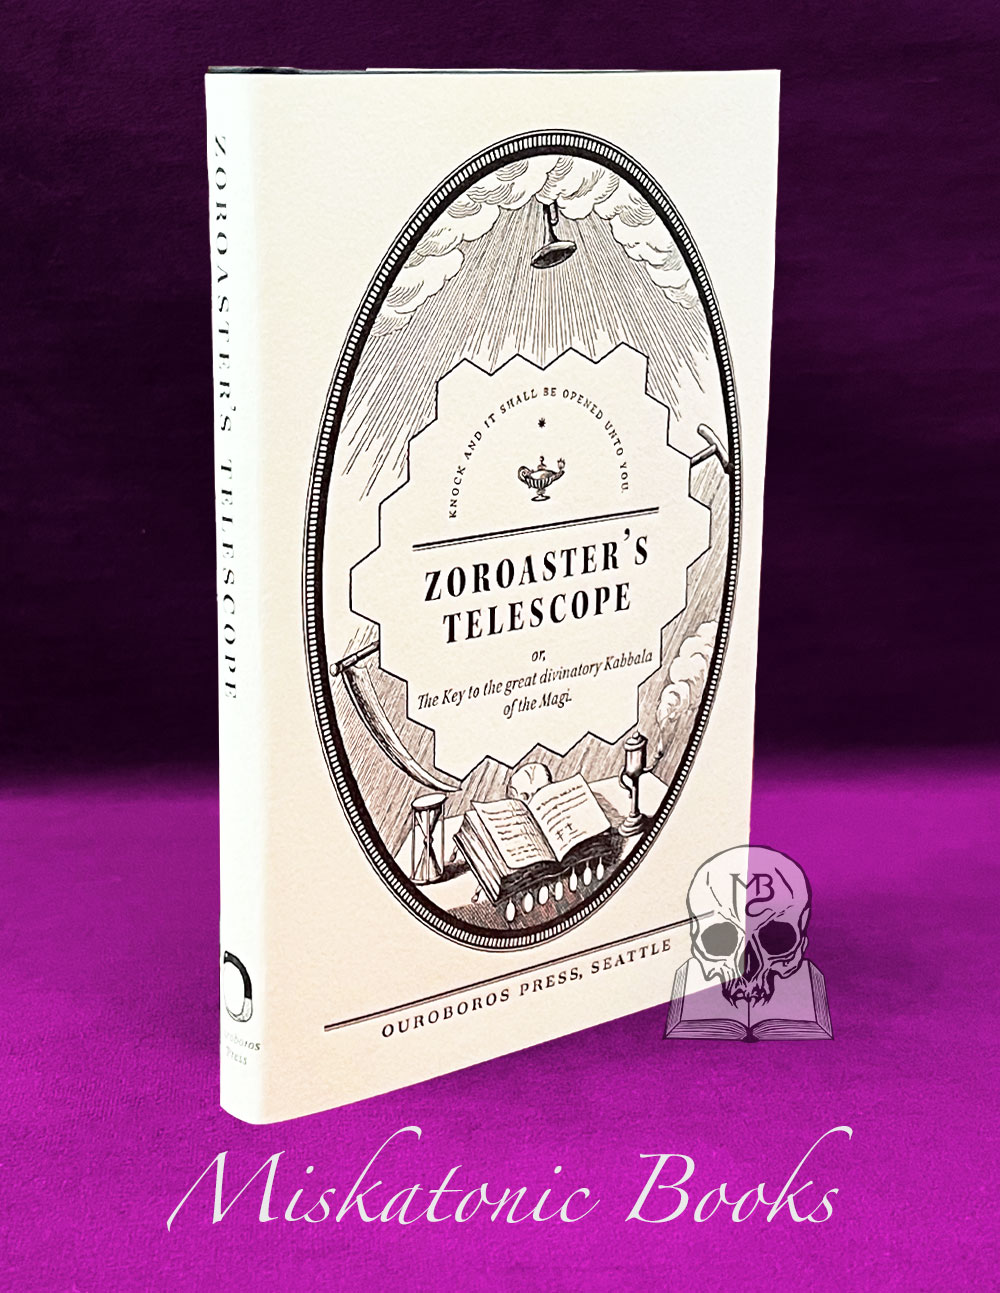 ZOROASTER'S TELESCOPE by John Leary (Hardcover Limited Edition)